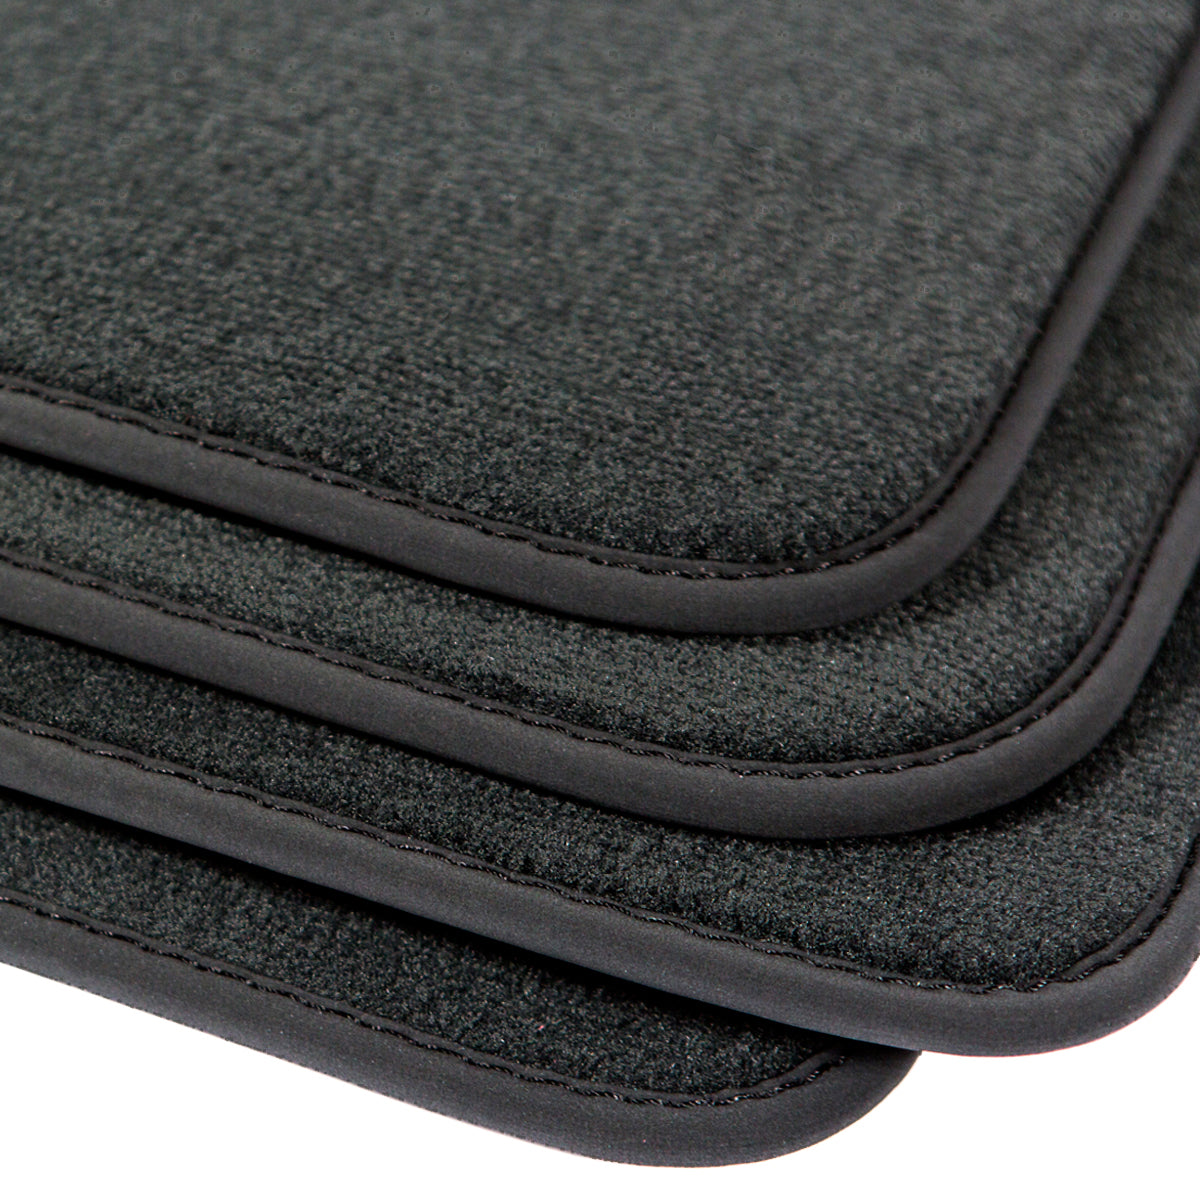 Bmw Floor Mats With Oem Quality Perfect Fit Matwise